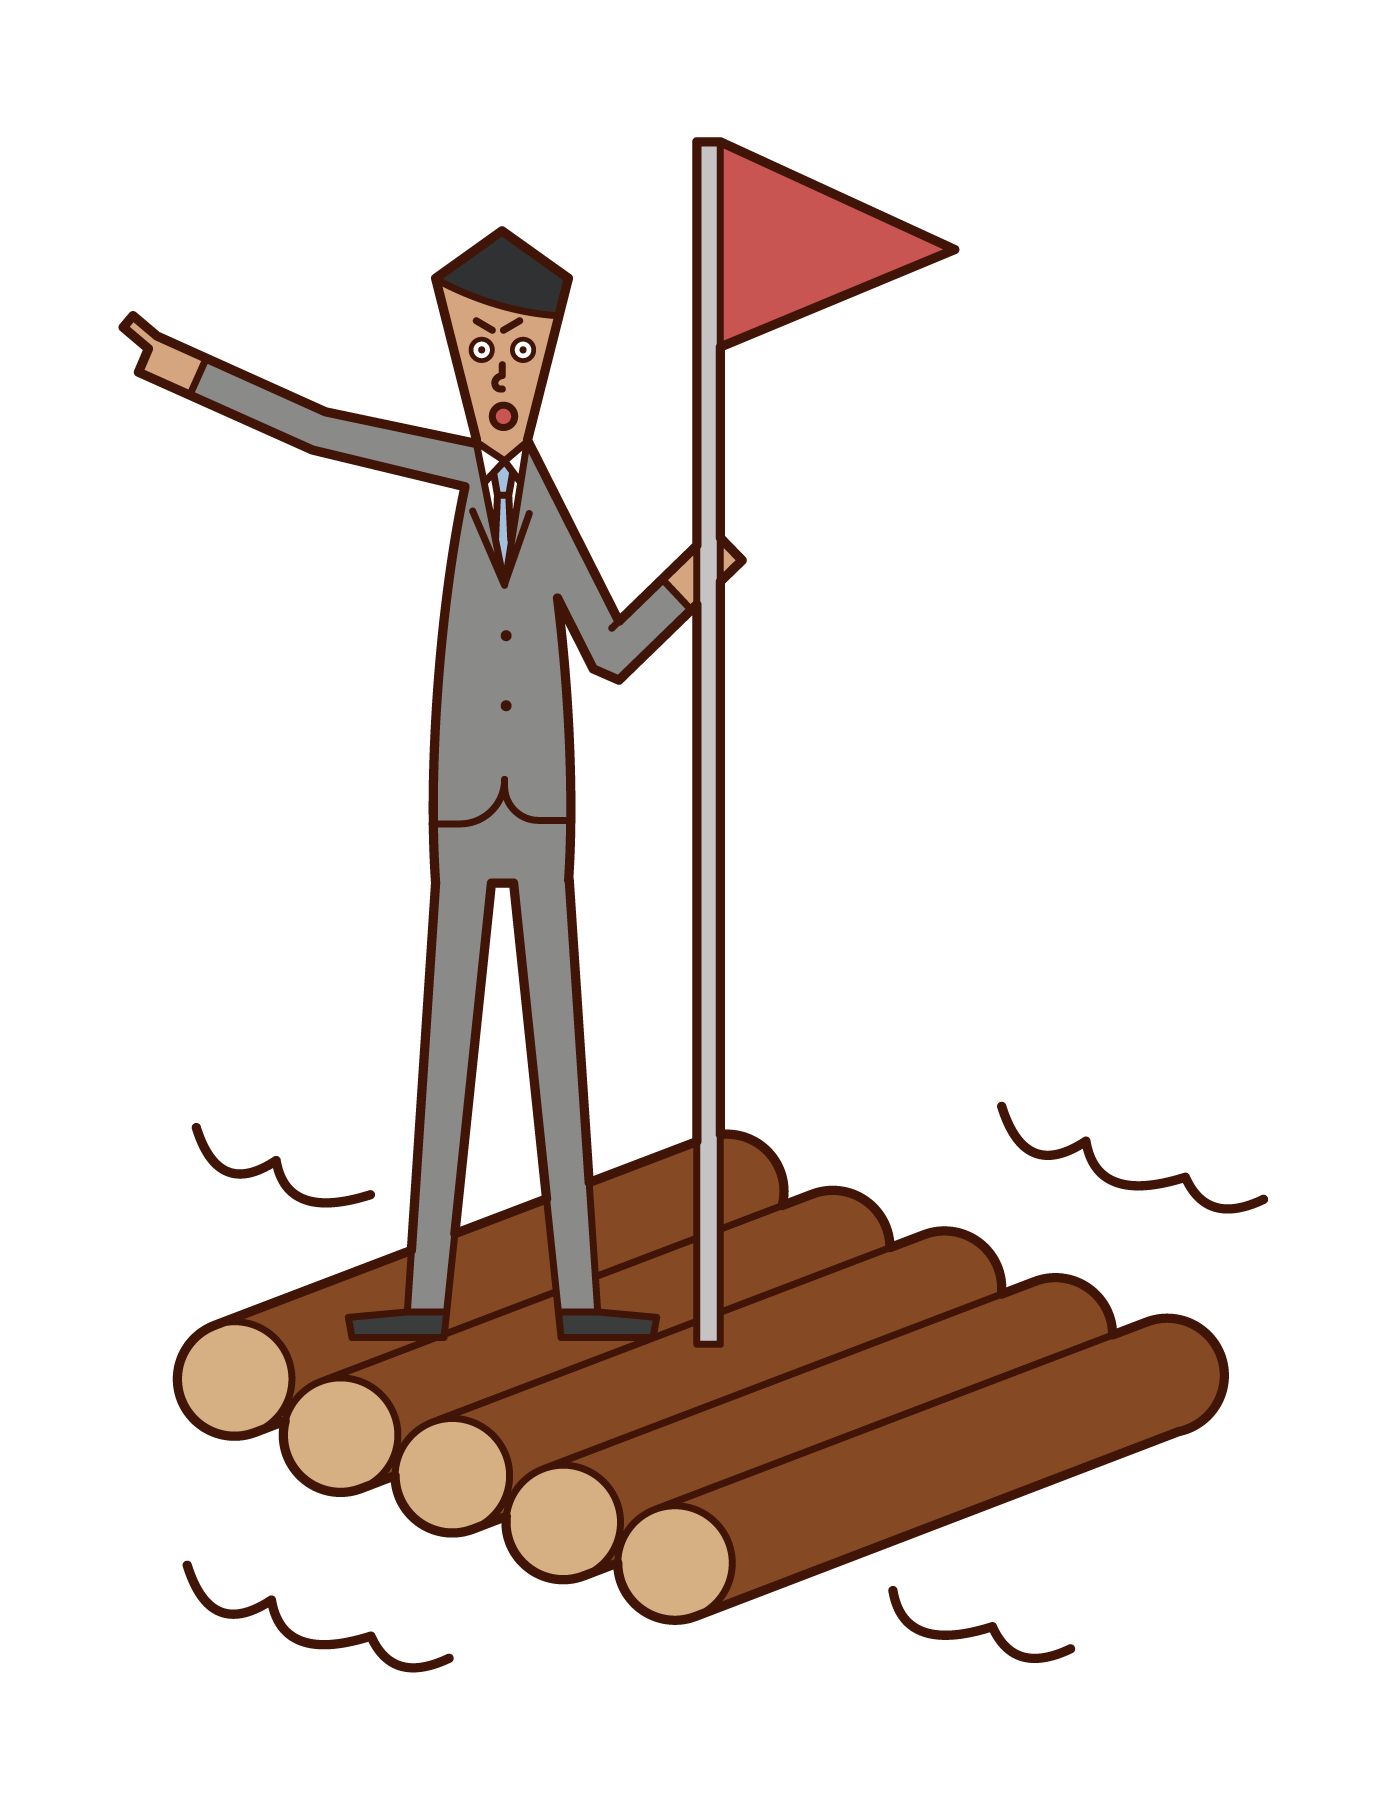 Illustration of a man (male) who rides a raft and aims for his destination